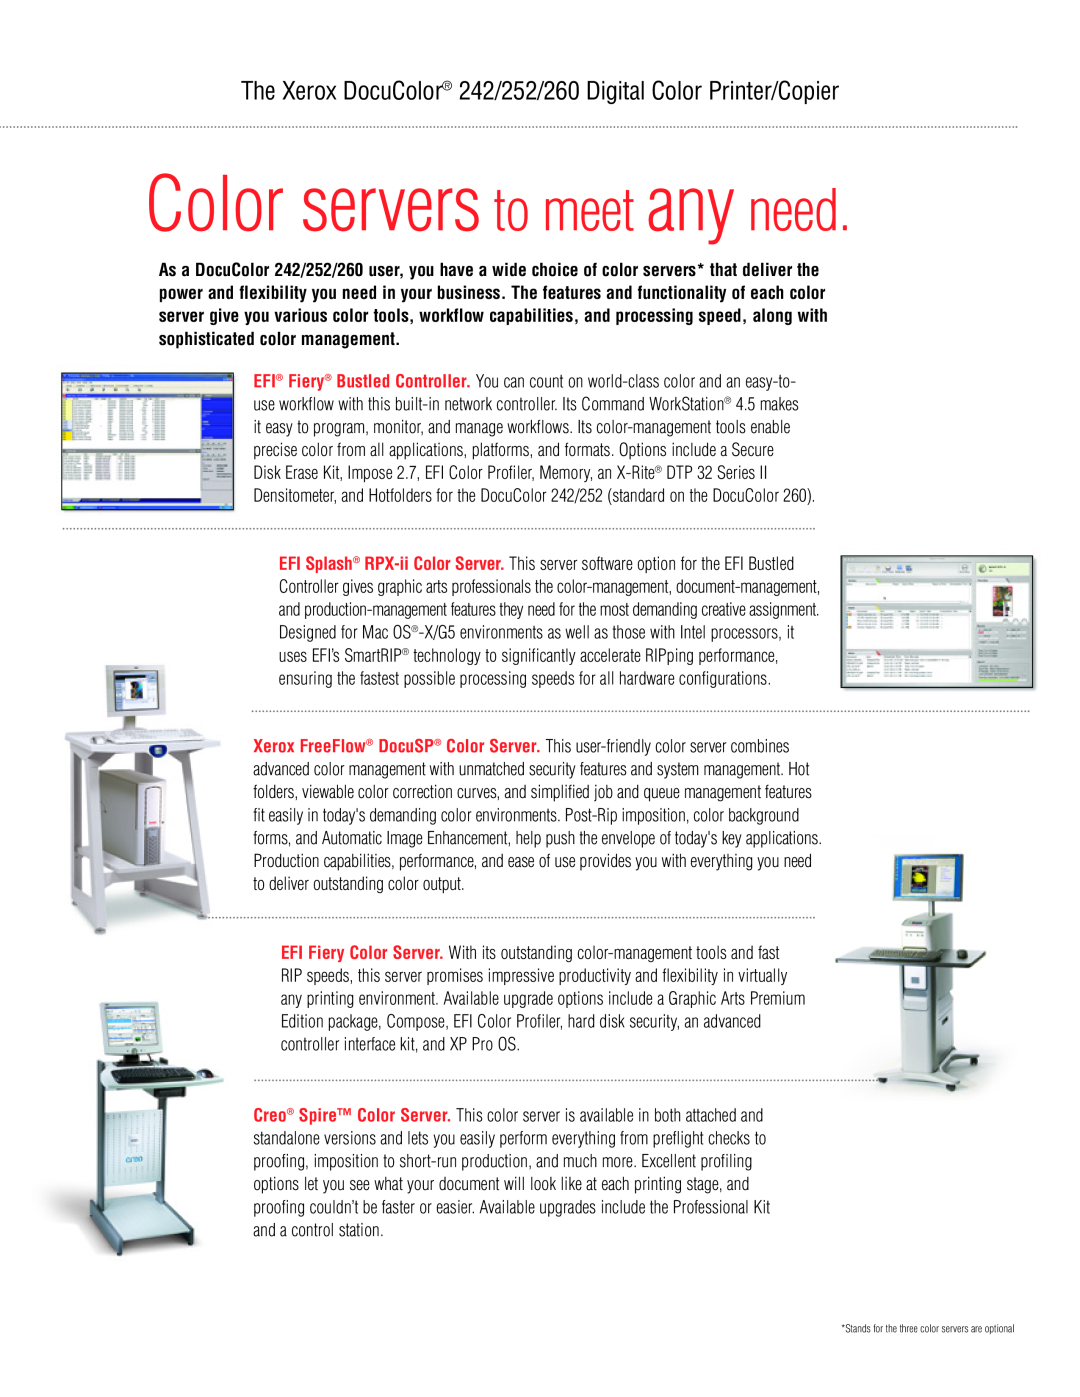 Xerox 260, 252, 242 manual Color servers to meet any need, Stands for the three color servers are optional 